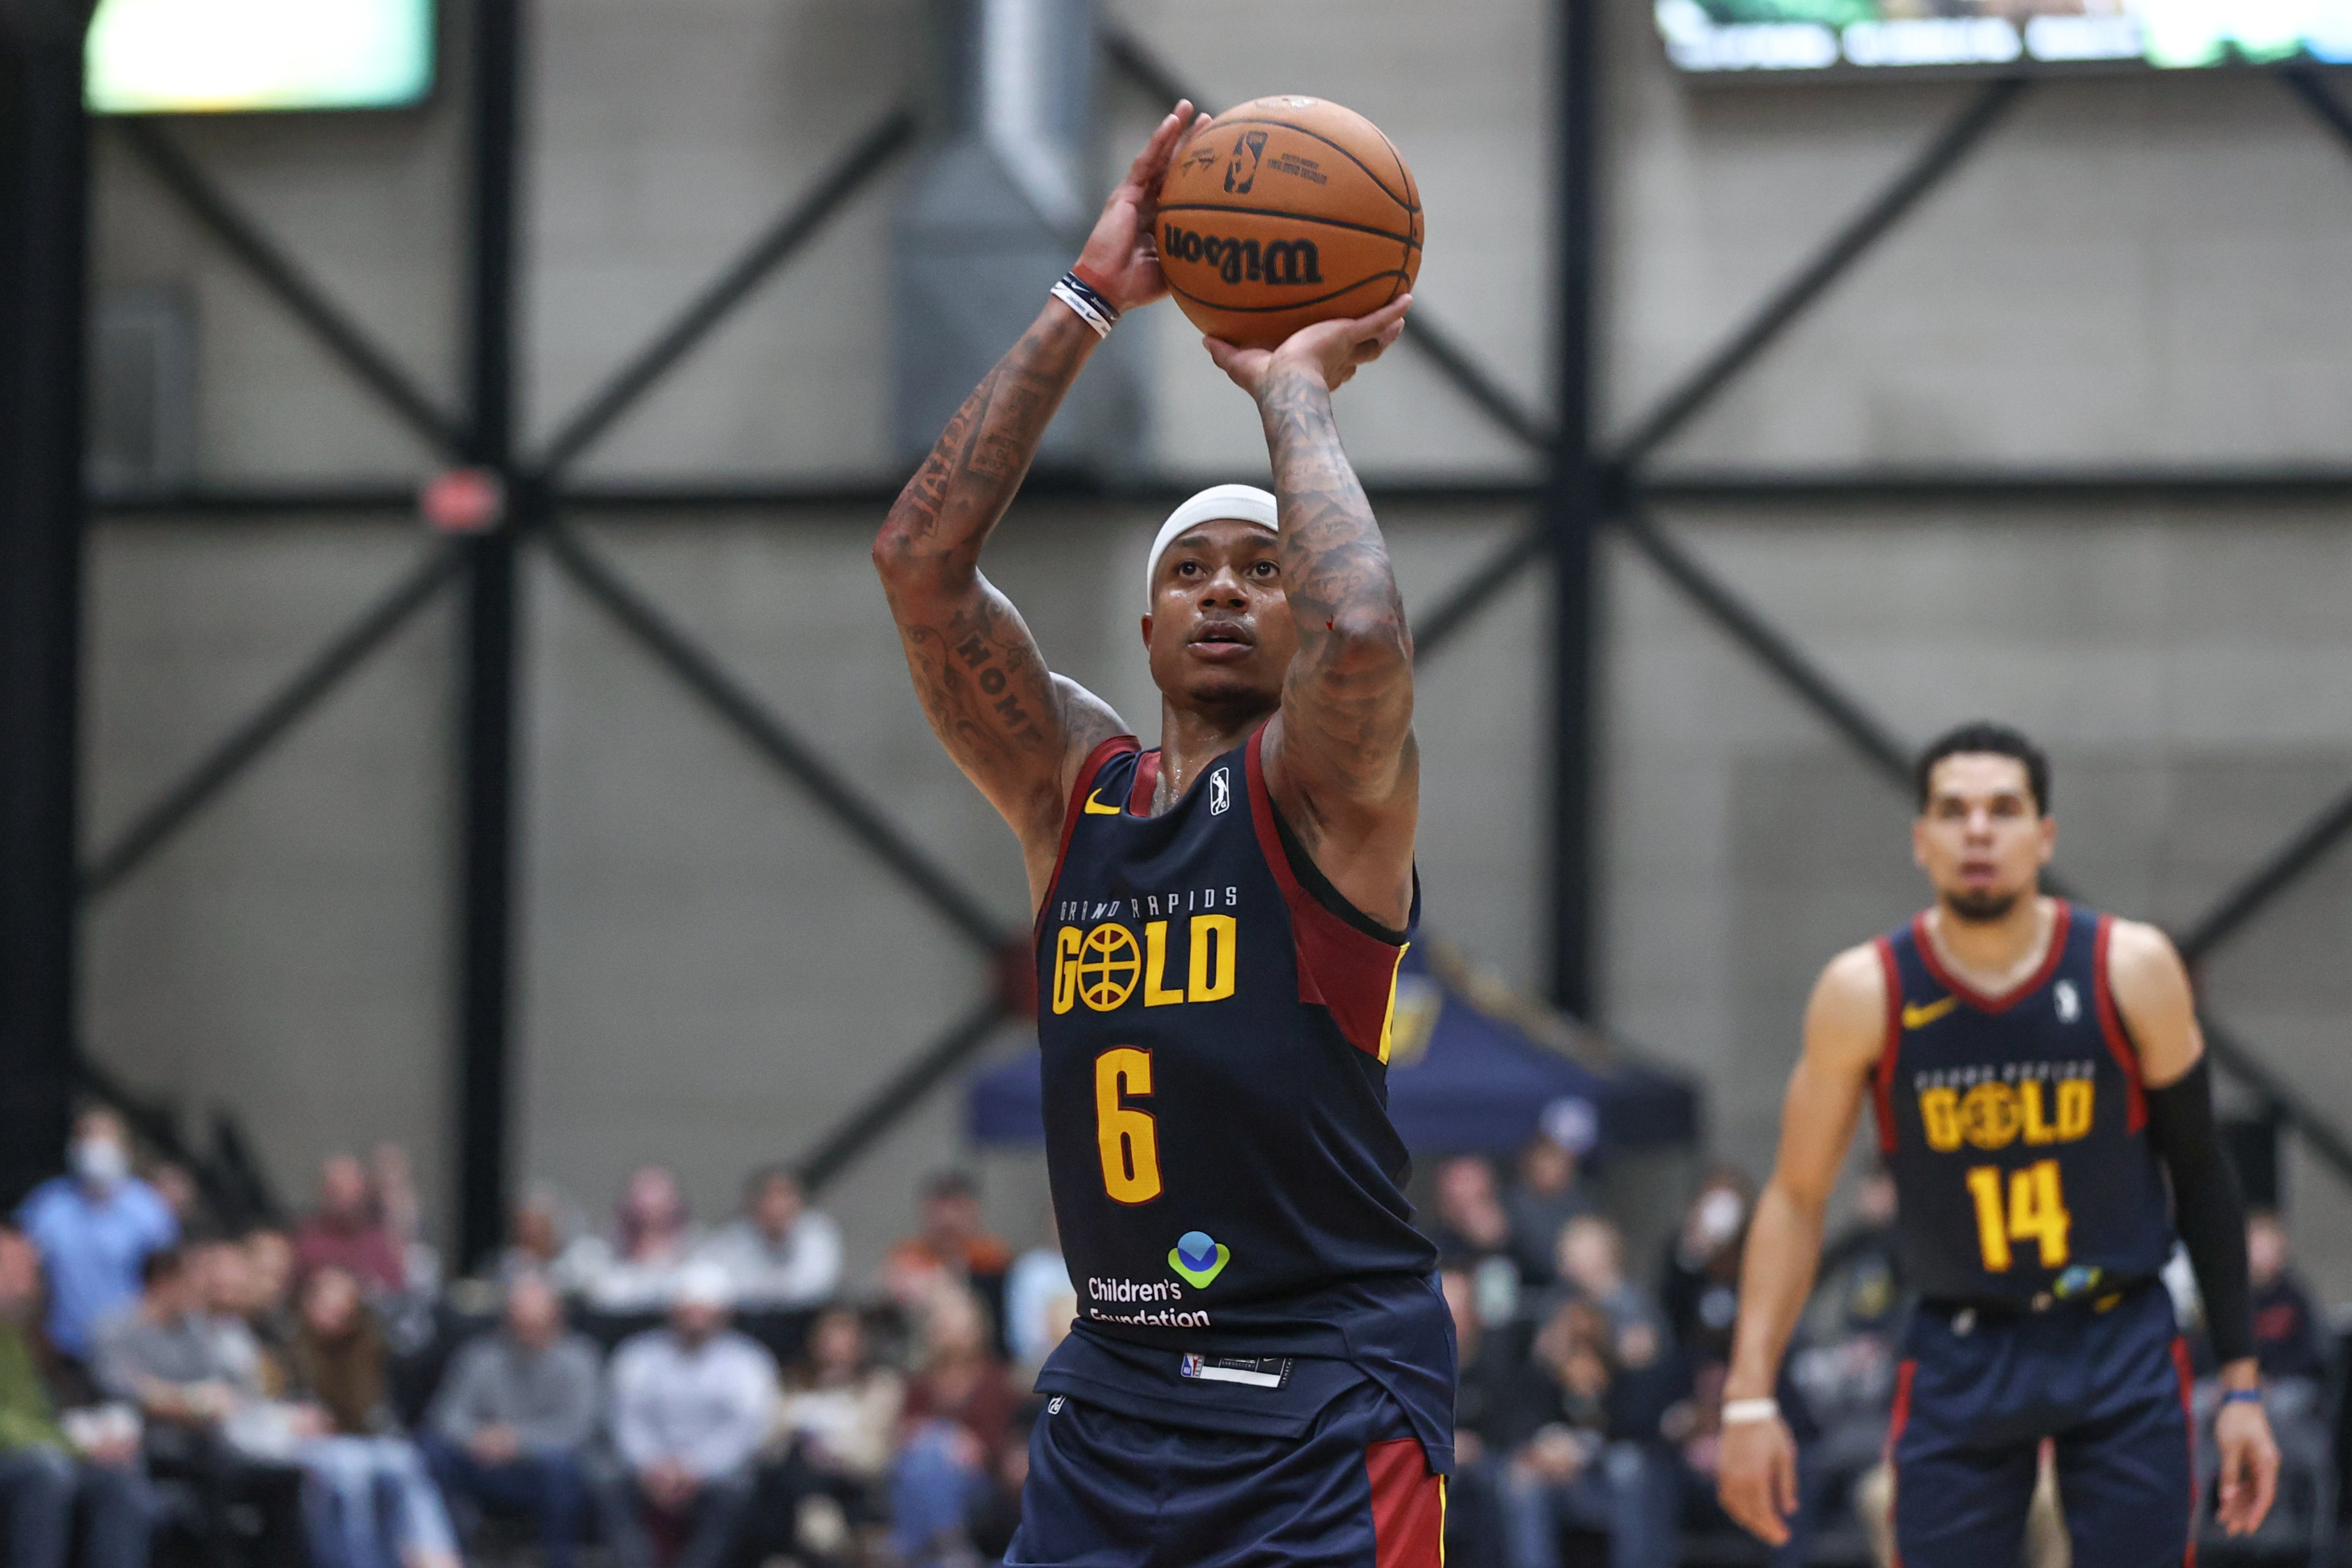 Isaiah Thomas signs 10-day contract with Lakers